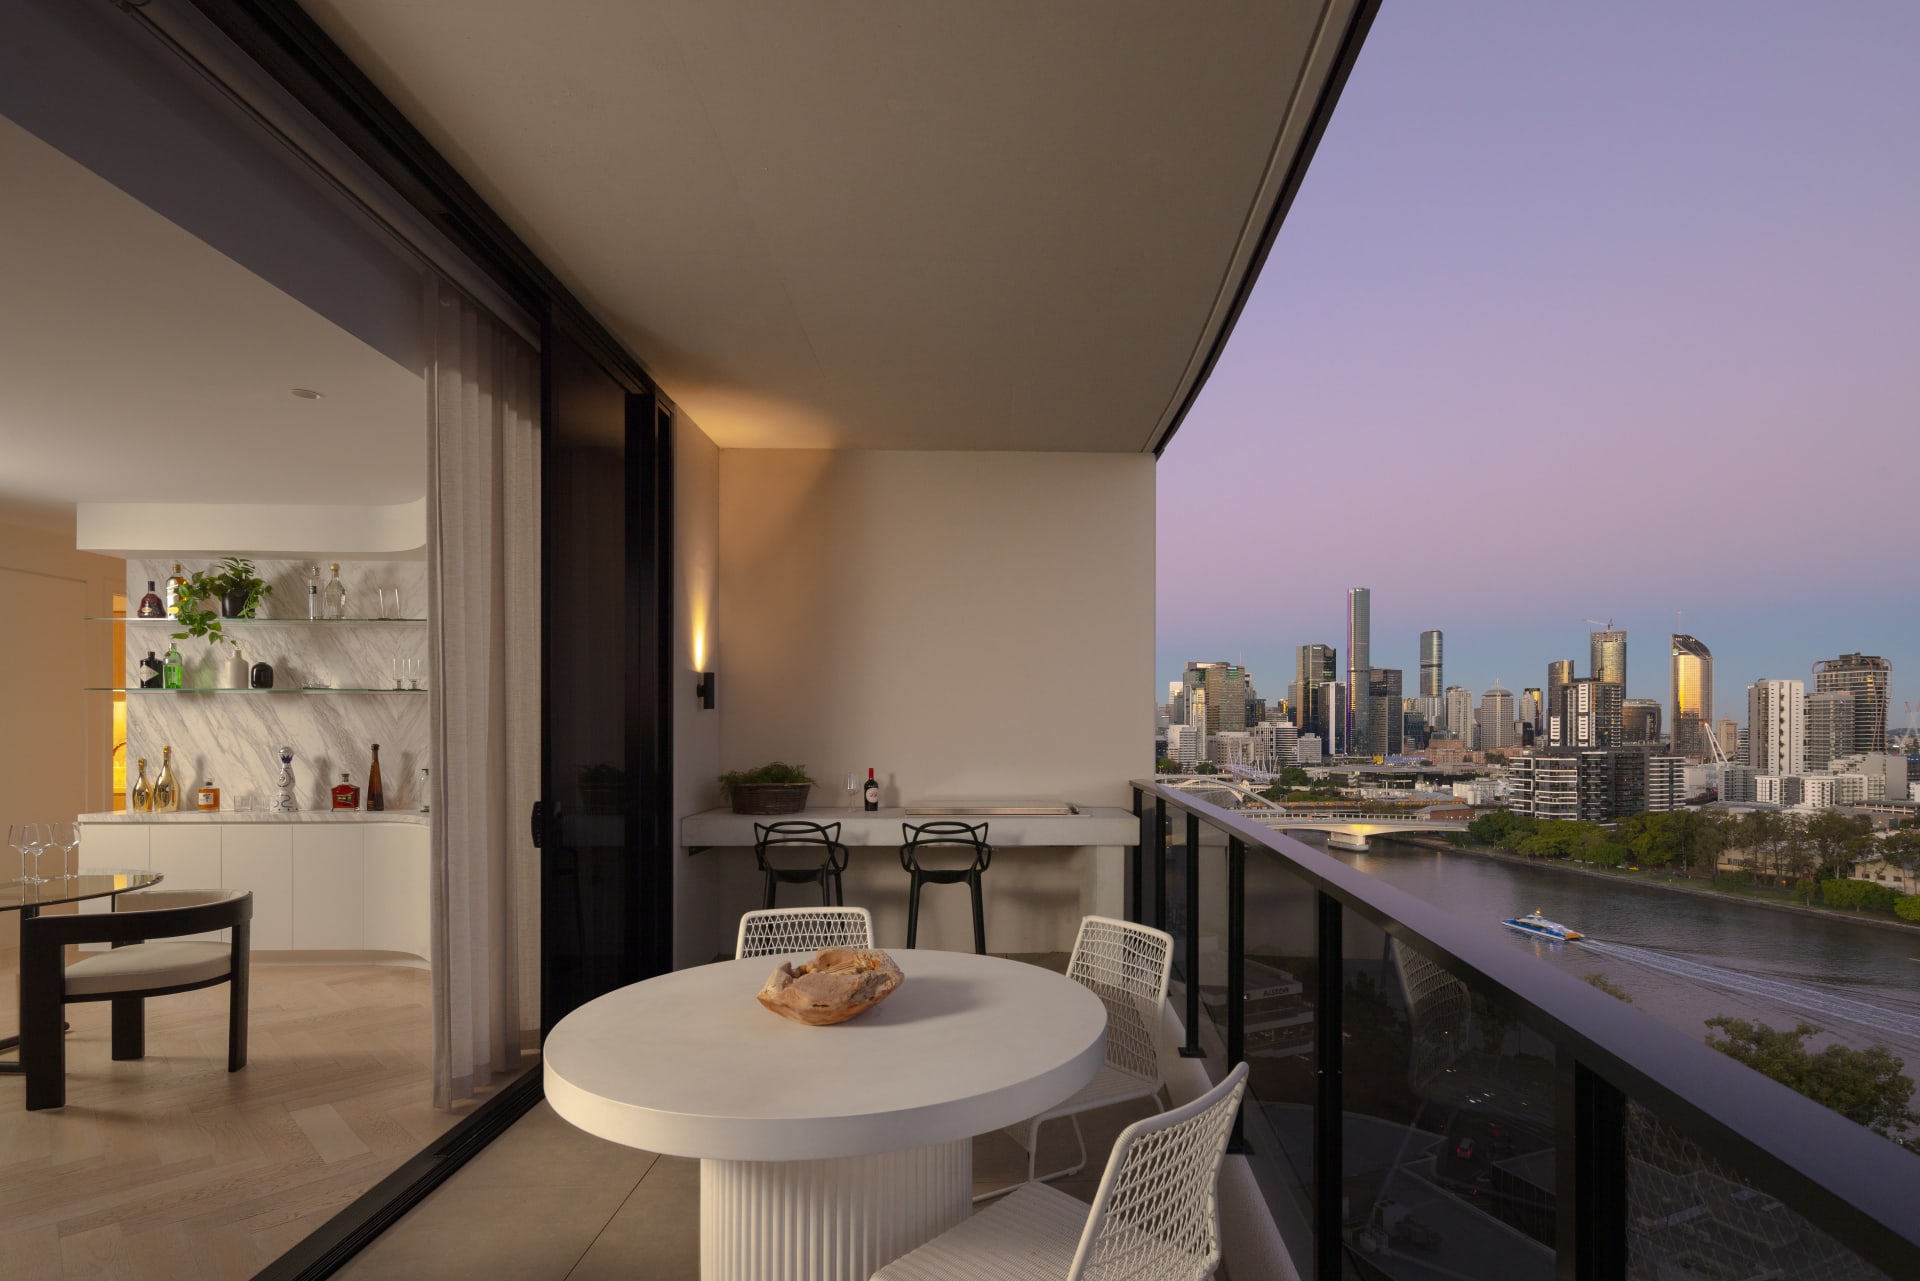 Kokoda release luxury penthouse collection in The Ambrose, Milton following completion